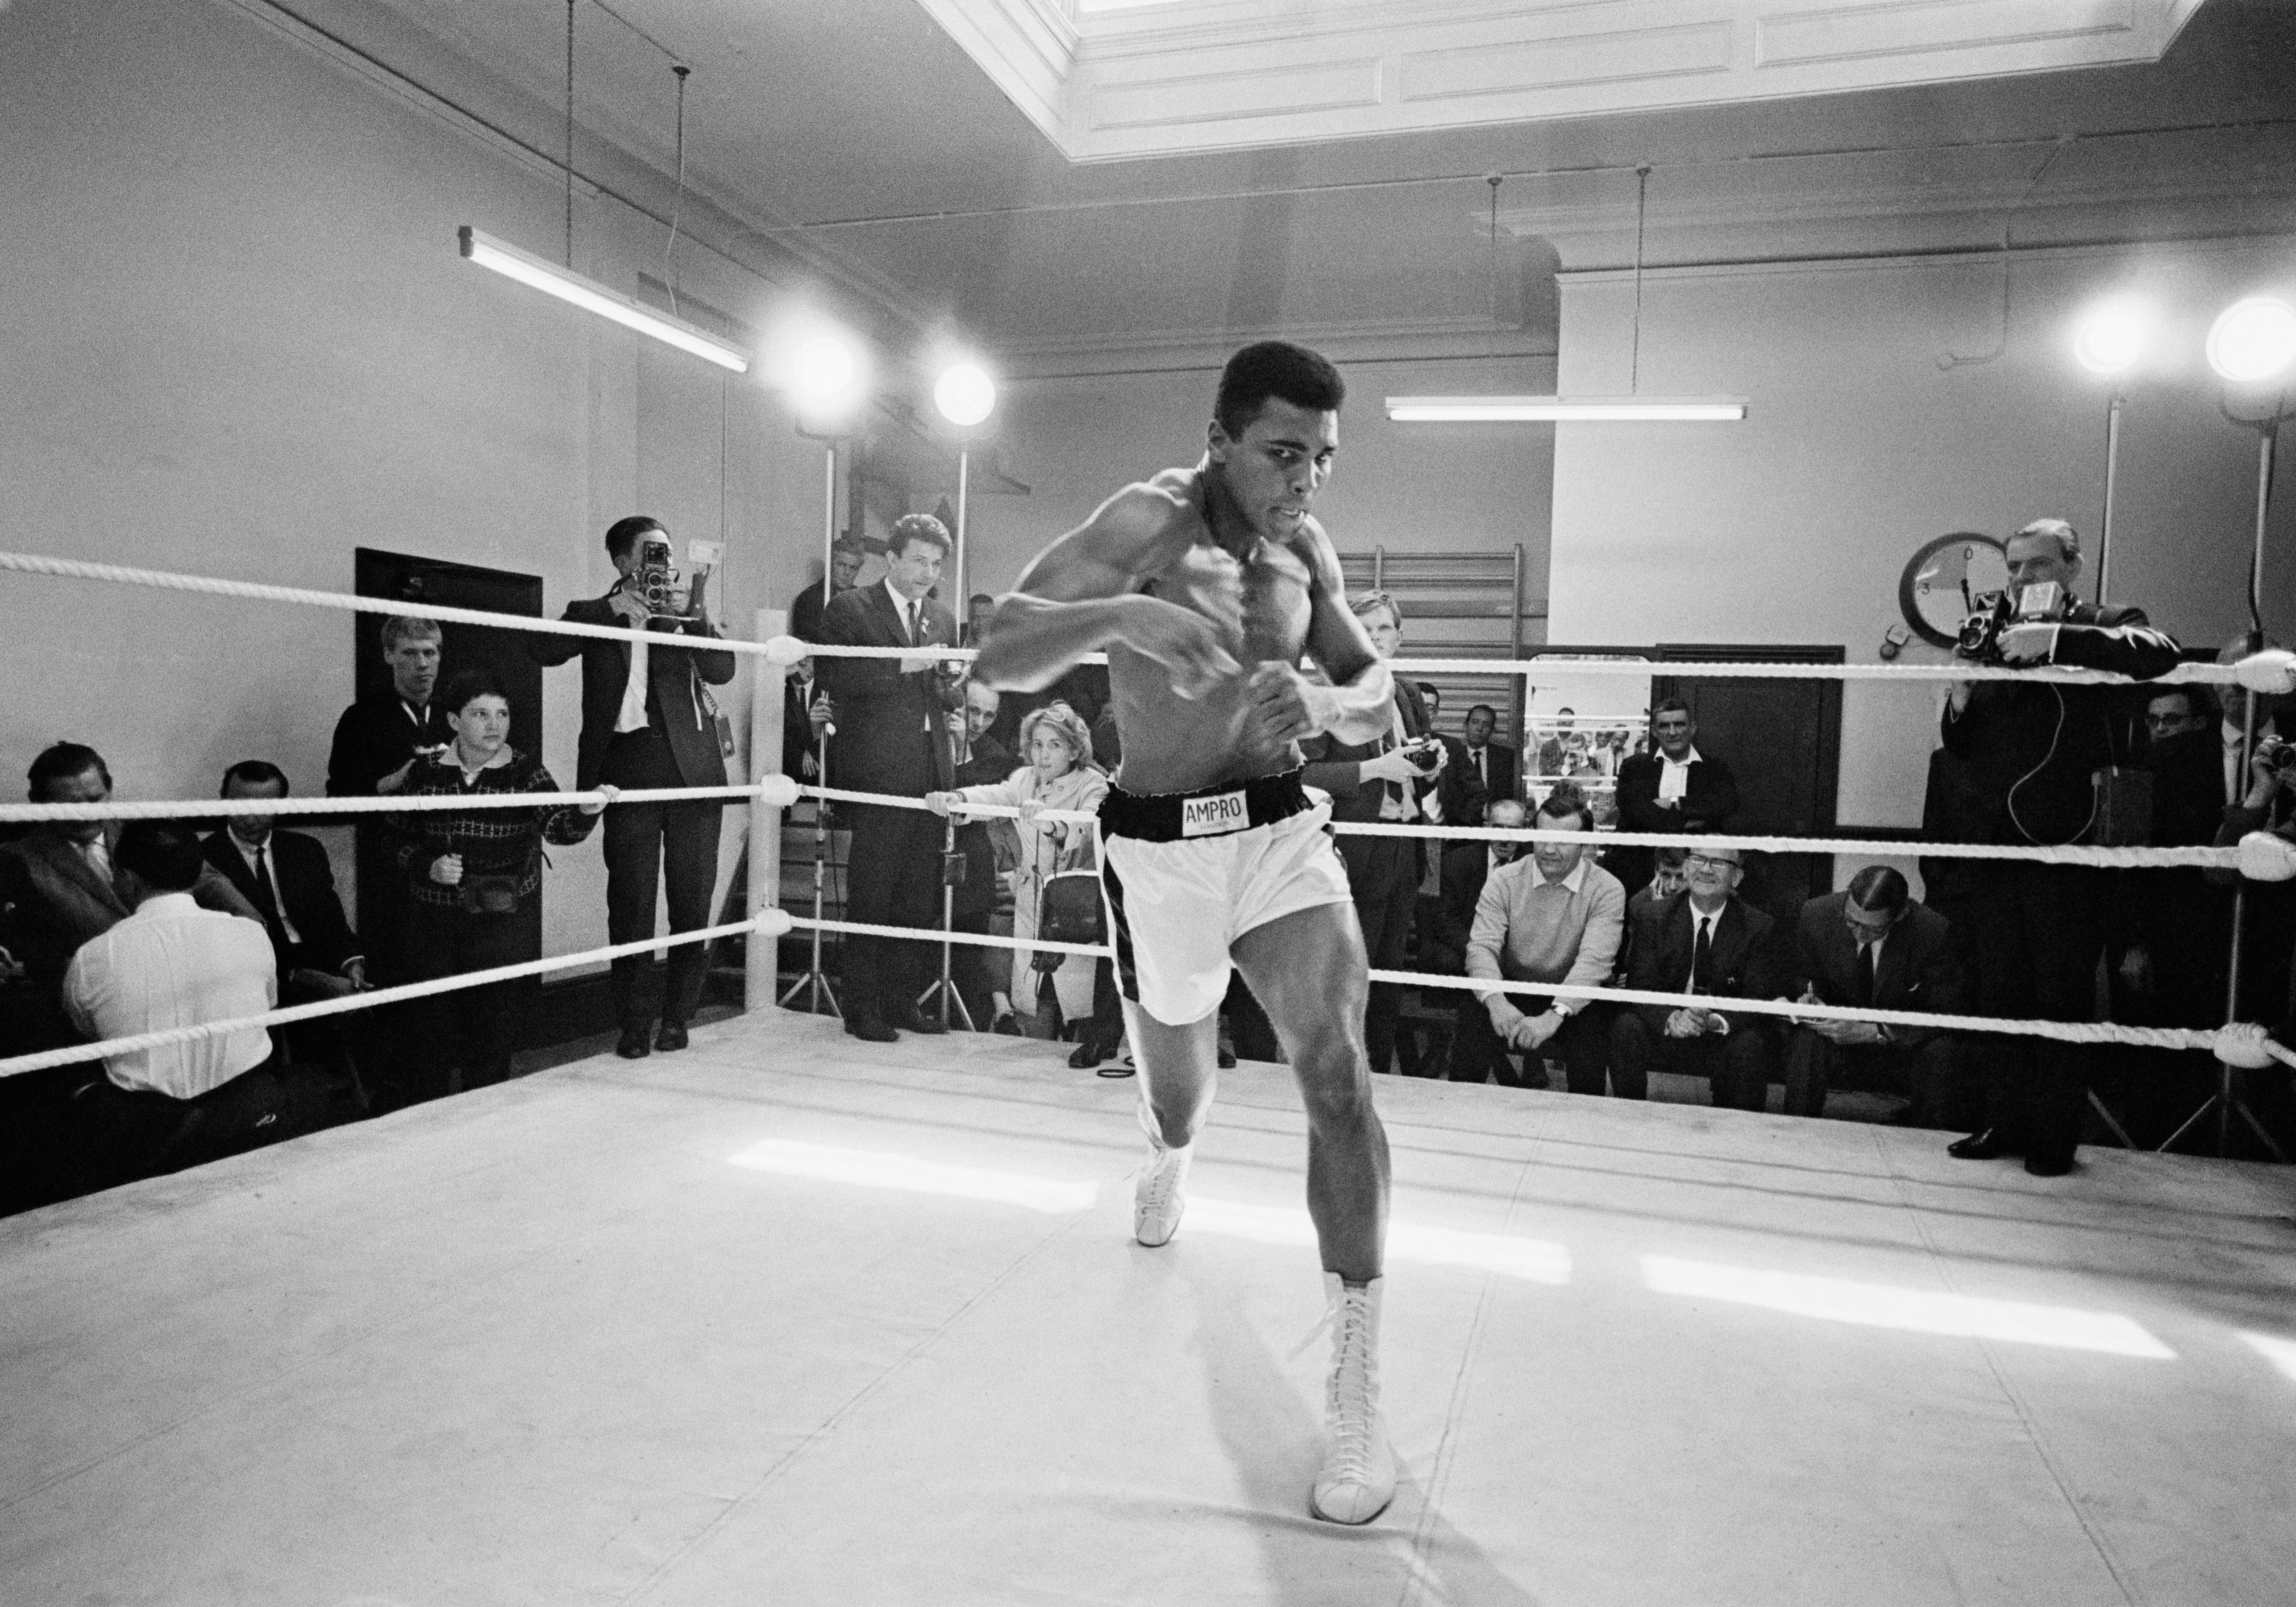  The heavyweight boxer throws bare-handed punches in the ring while in training for his fight against Brian London in London, 1966